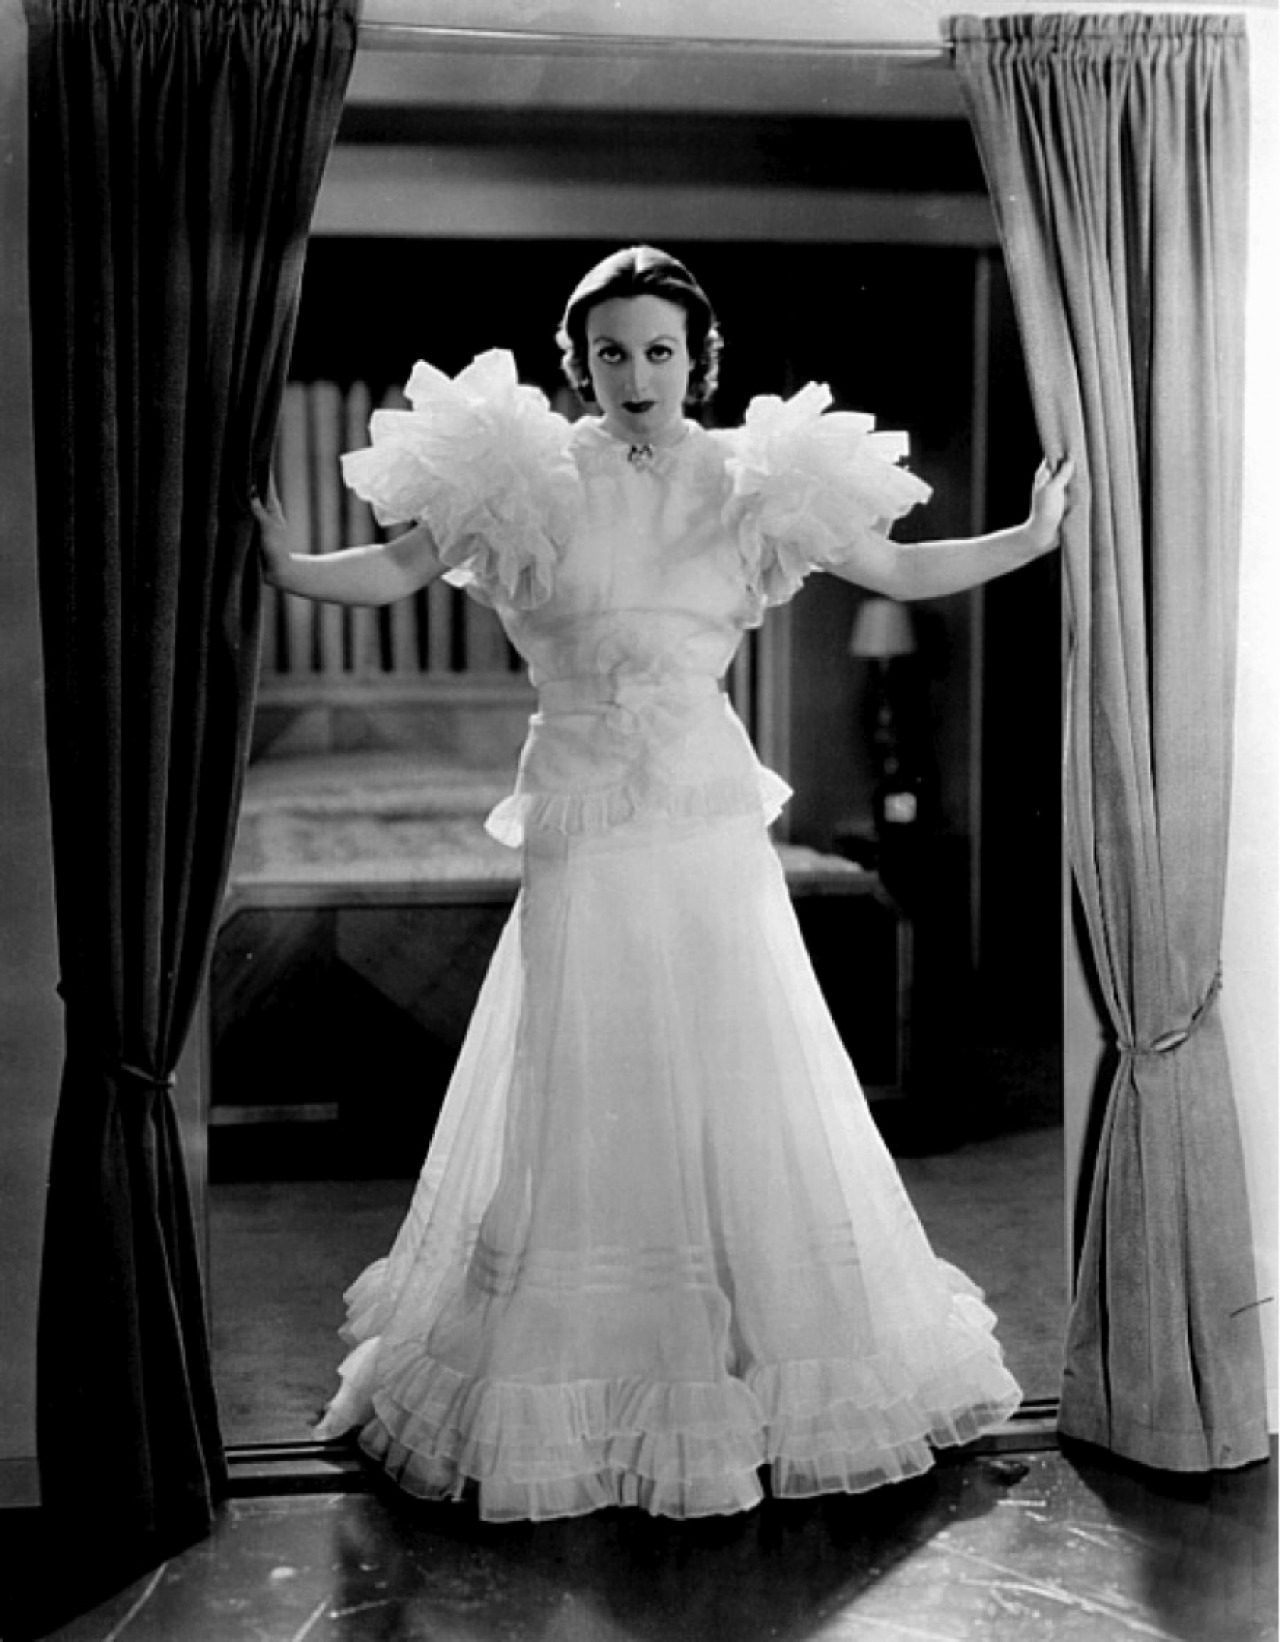 Evening wear: 1930-1940s women  Fashion and Decor: A Cultural History